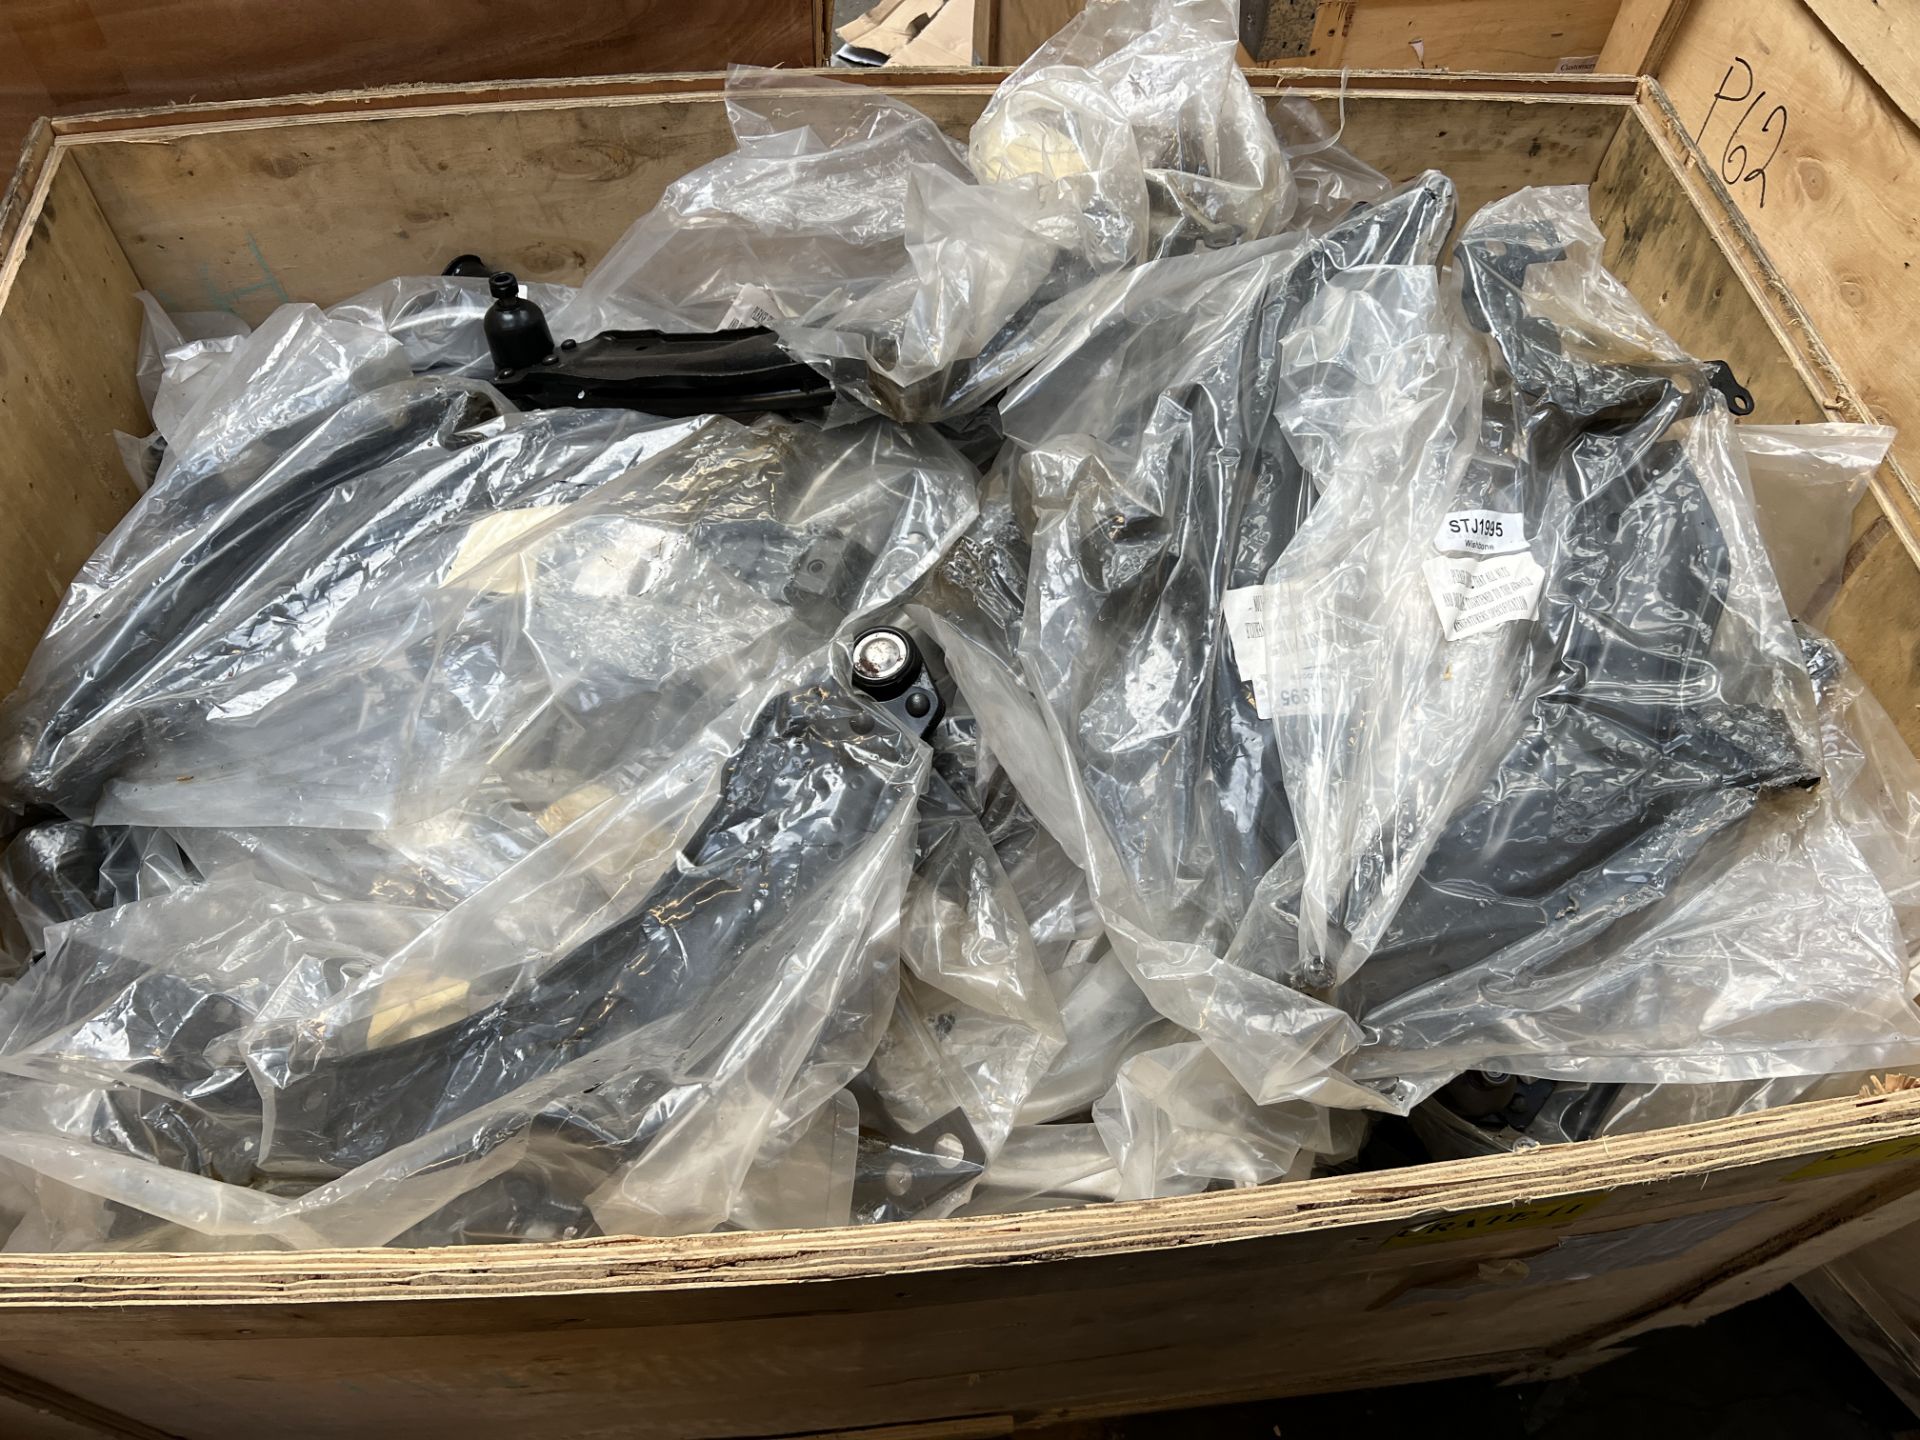 One Crate of approx 91 FCA5582 L/H Suspension Arms for BMW 5 Series - circa £40 online value